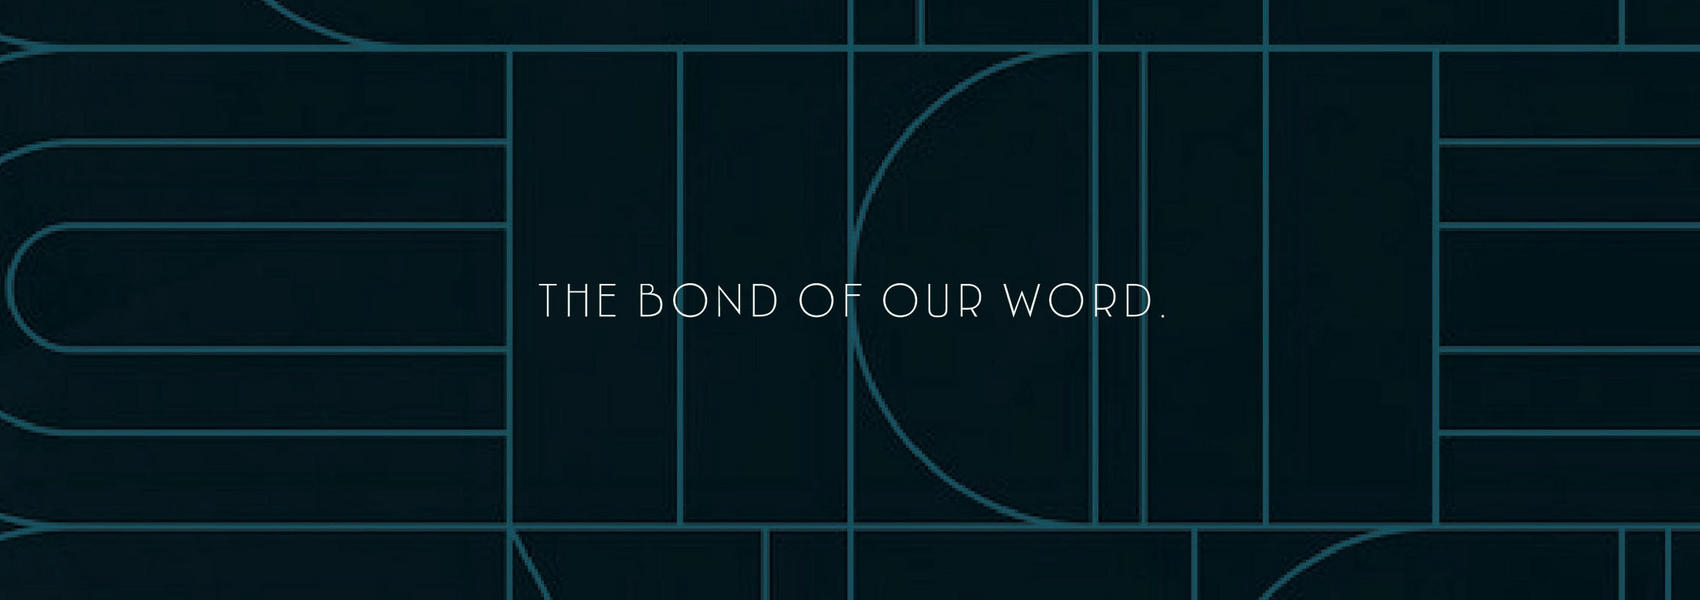 Phrase The Bond of Our Word against dark teal background